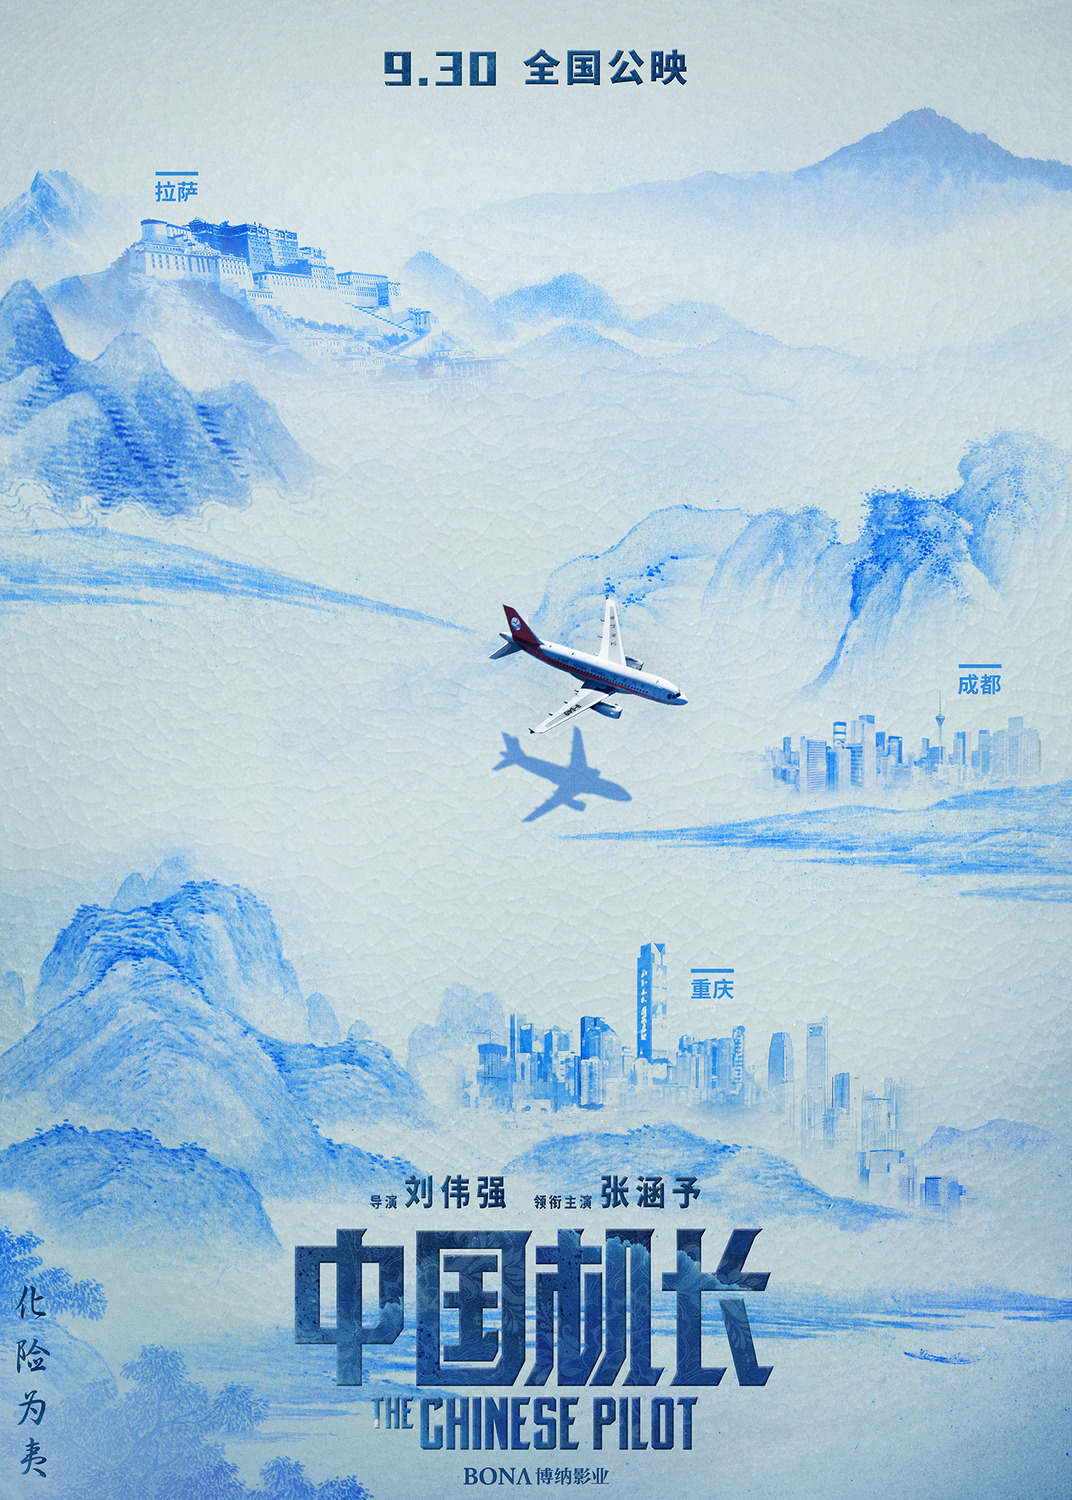 Extra Large Movie Poster Image for The Chinese Pilot (#14 of 17)